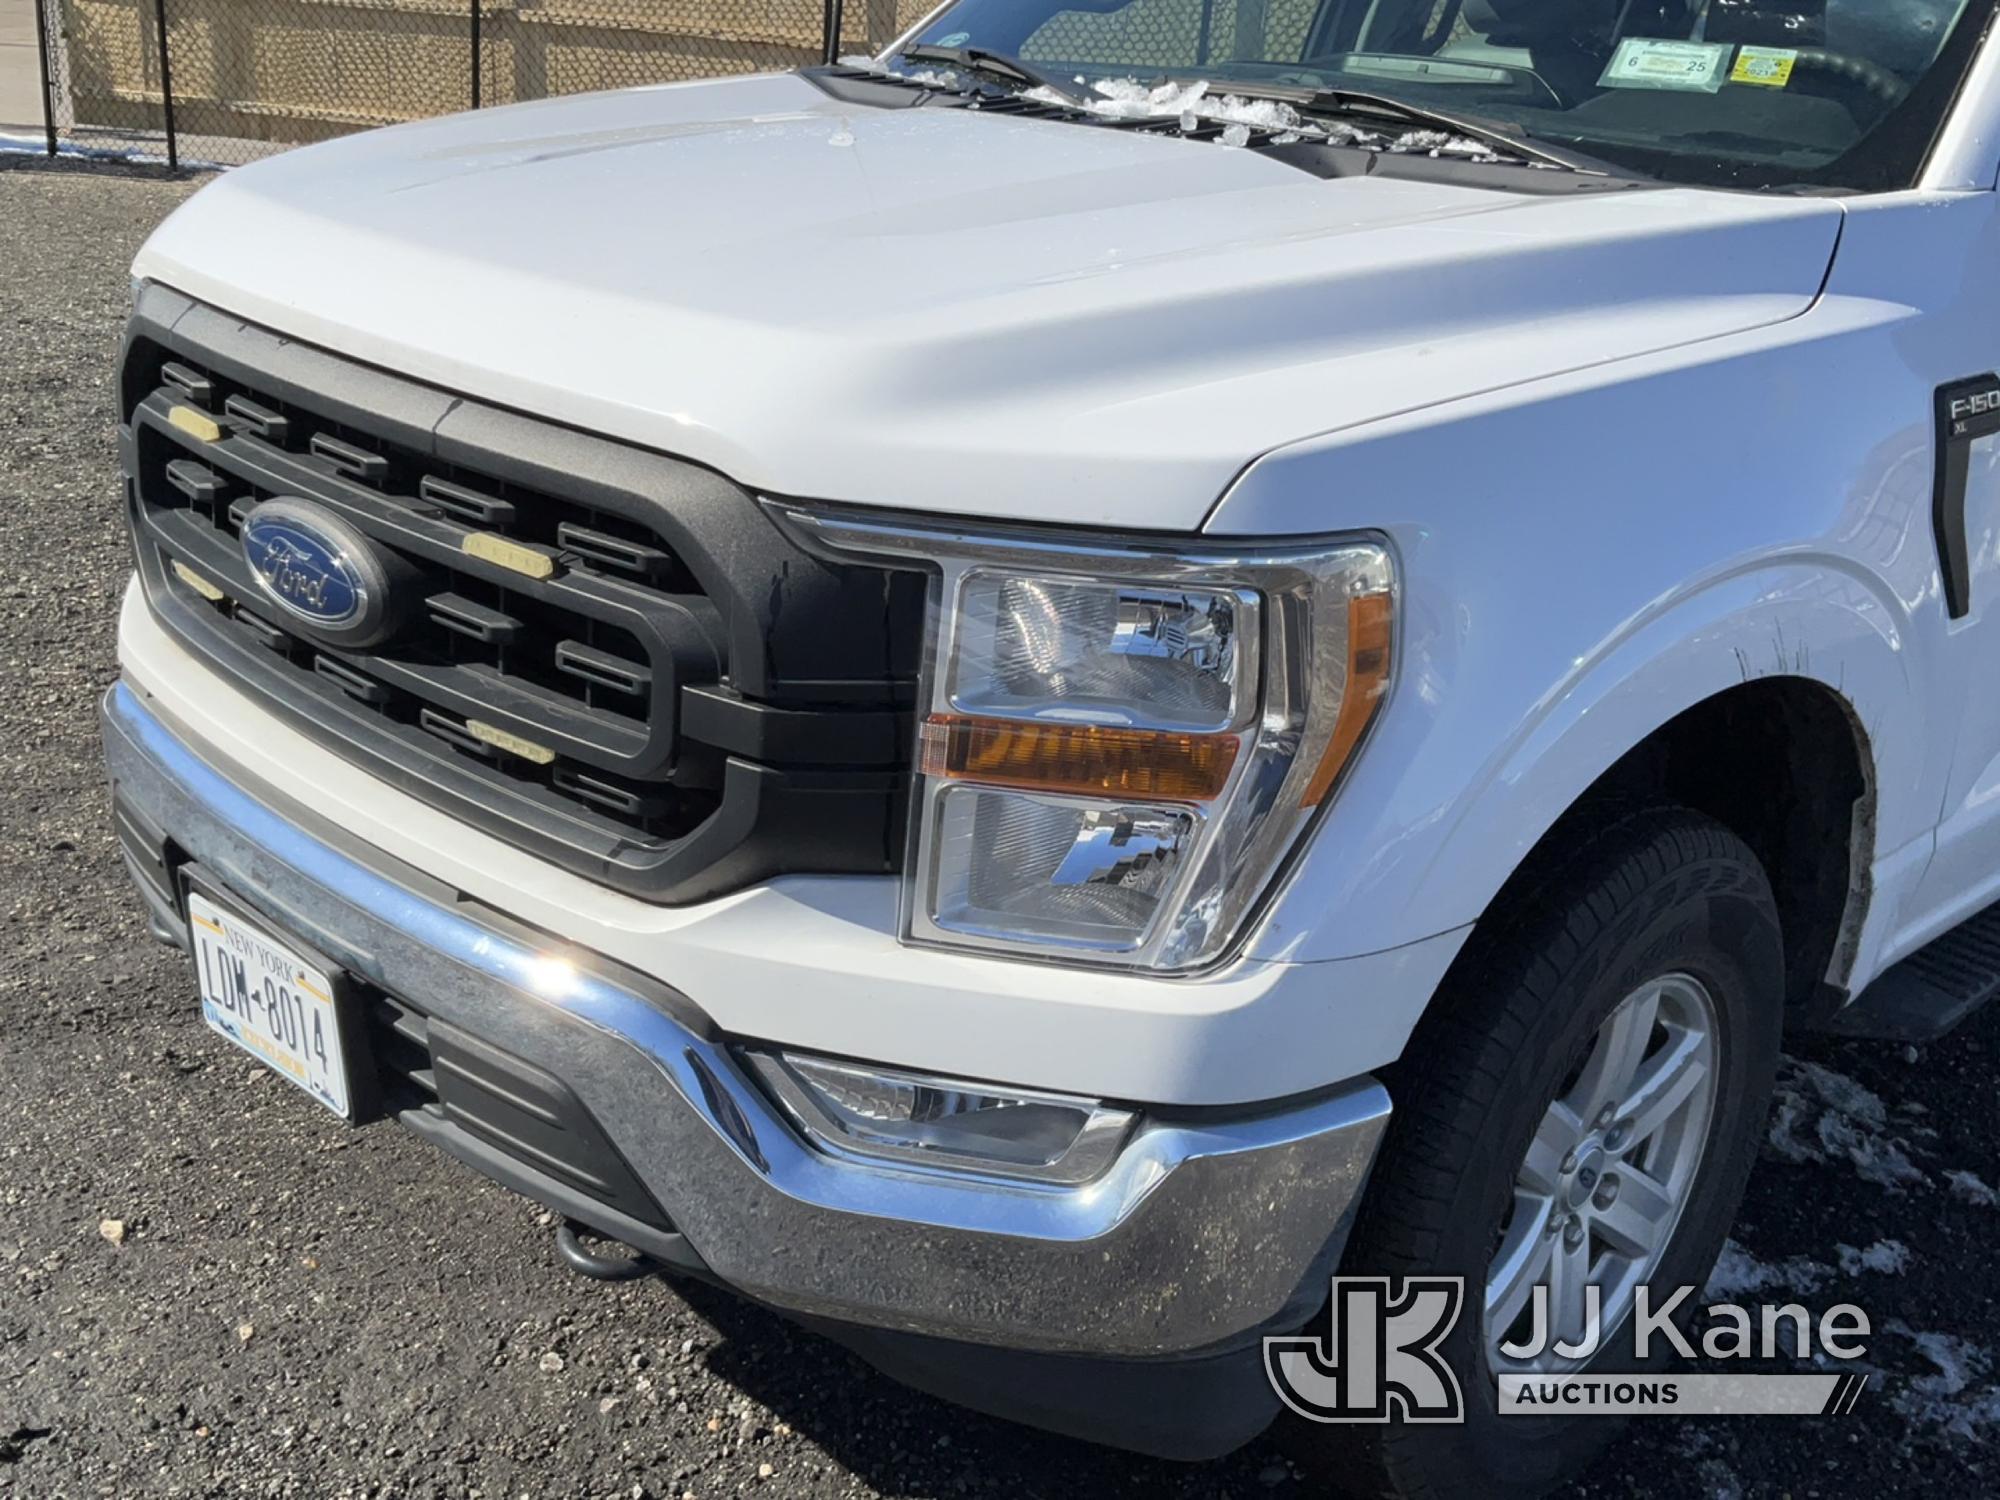 (Kings Park, NY) 2021 Ford F150 Crew-Cab Pickup Truck Runs & Moves) (Inspection and Removal BY APPOI